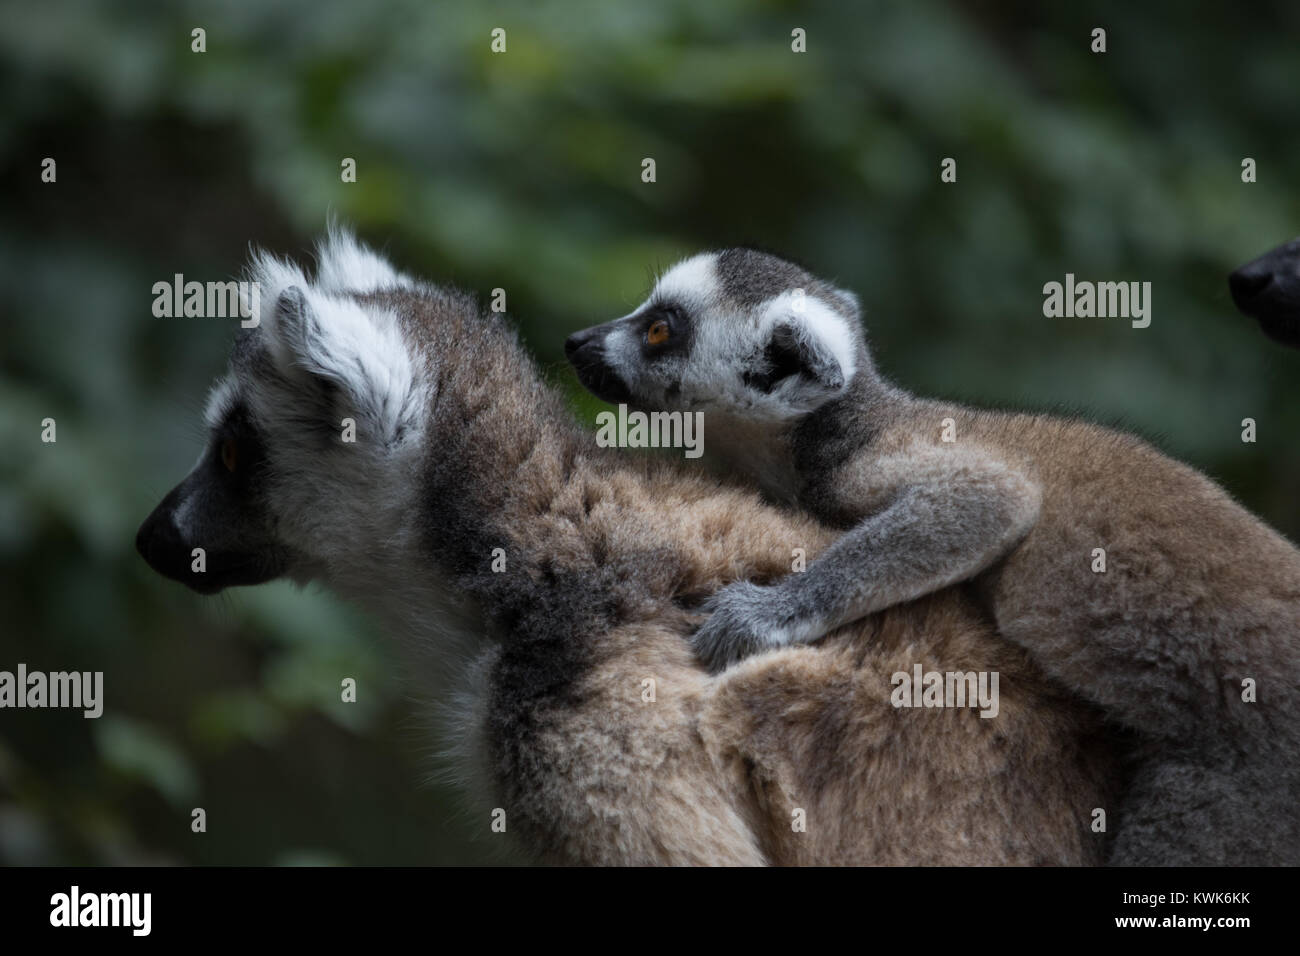 Baby Madagascar ring-tailed lemur (Lemur catta) on mothers back from the Monkeyland Sanctuary in Plettenberg Bay, South Africa. Stock Photo